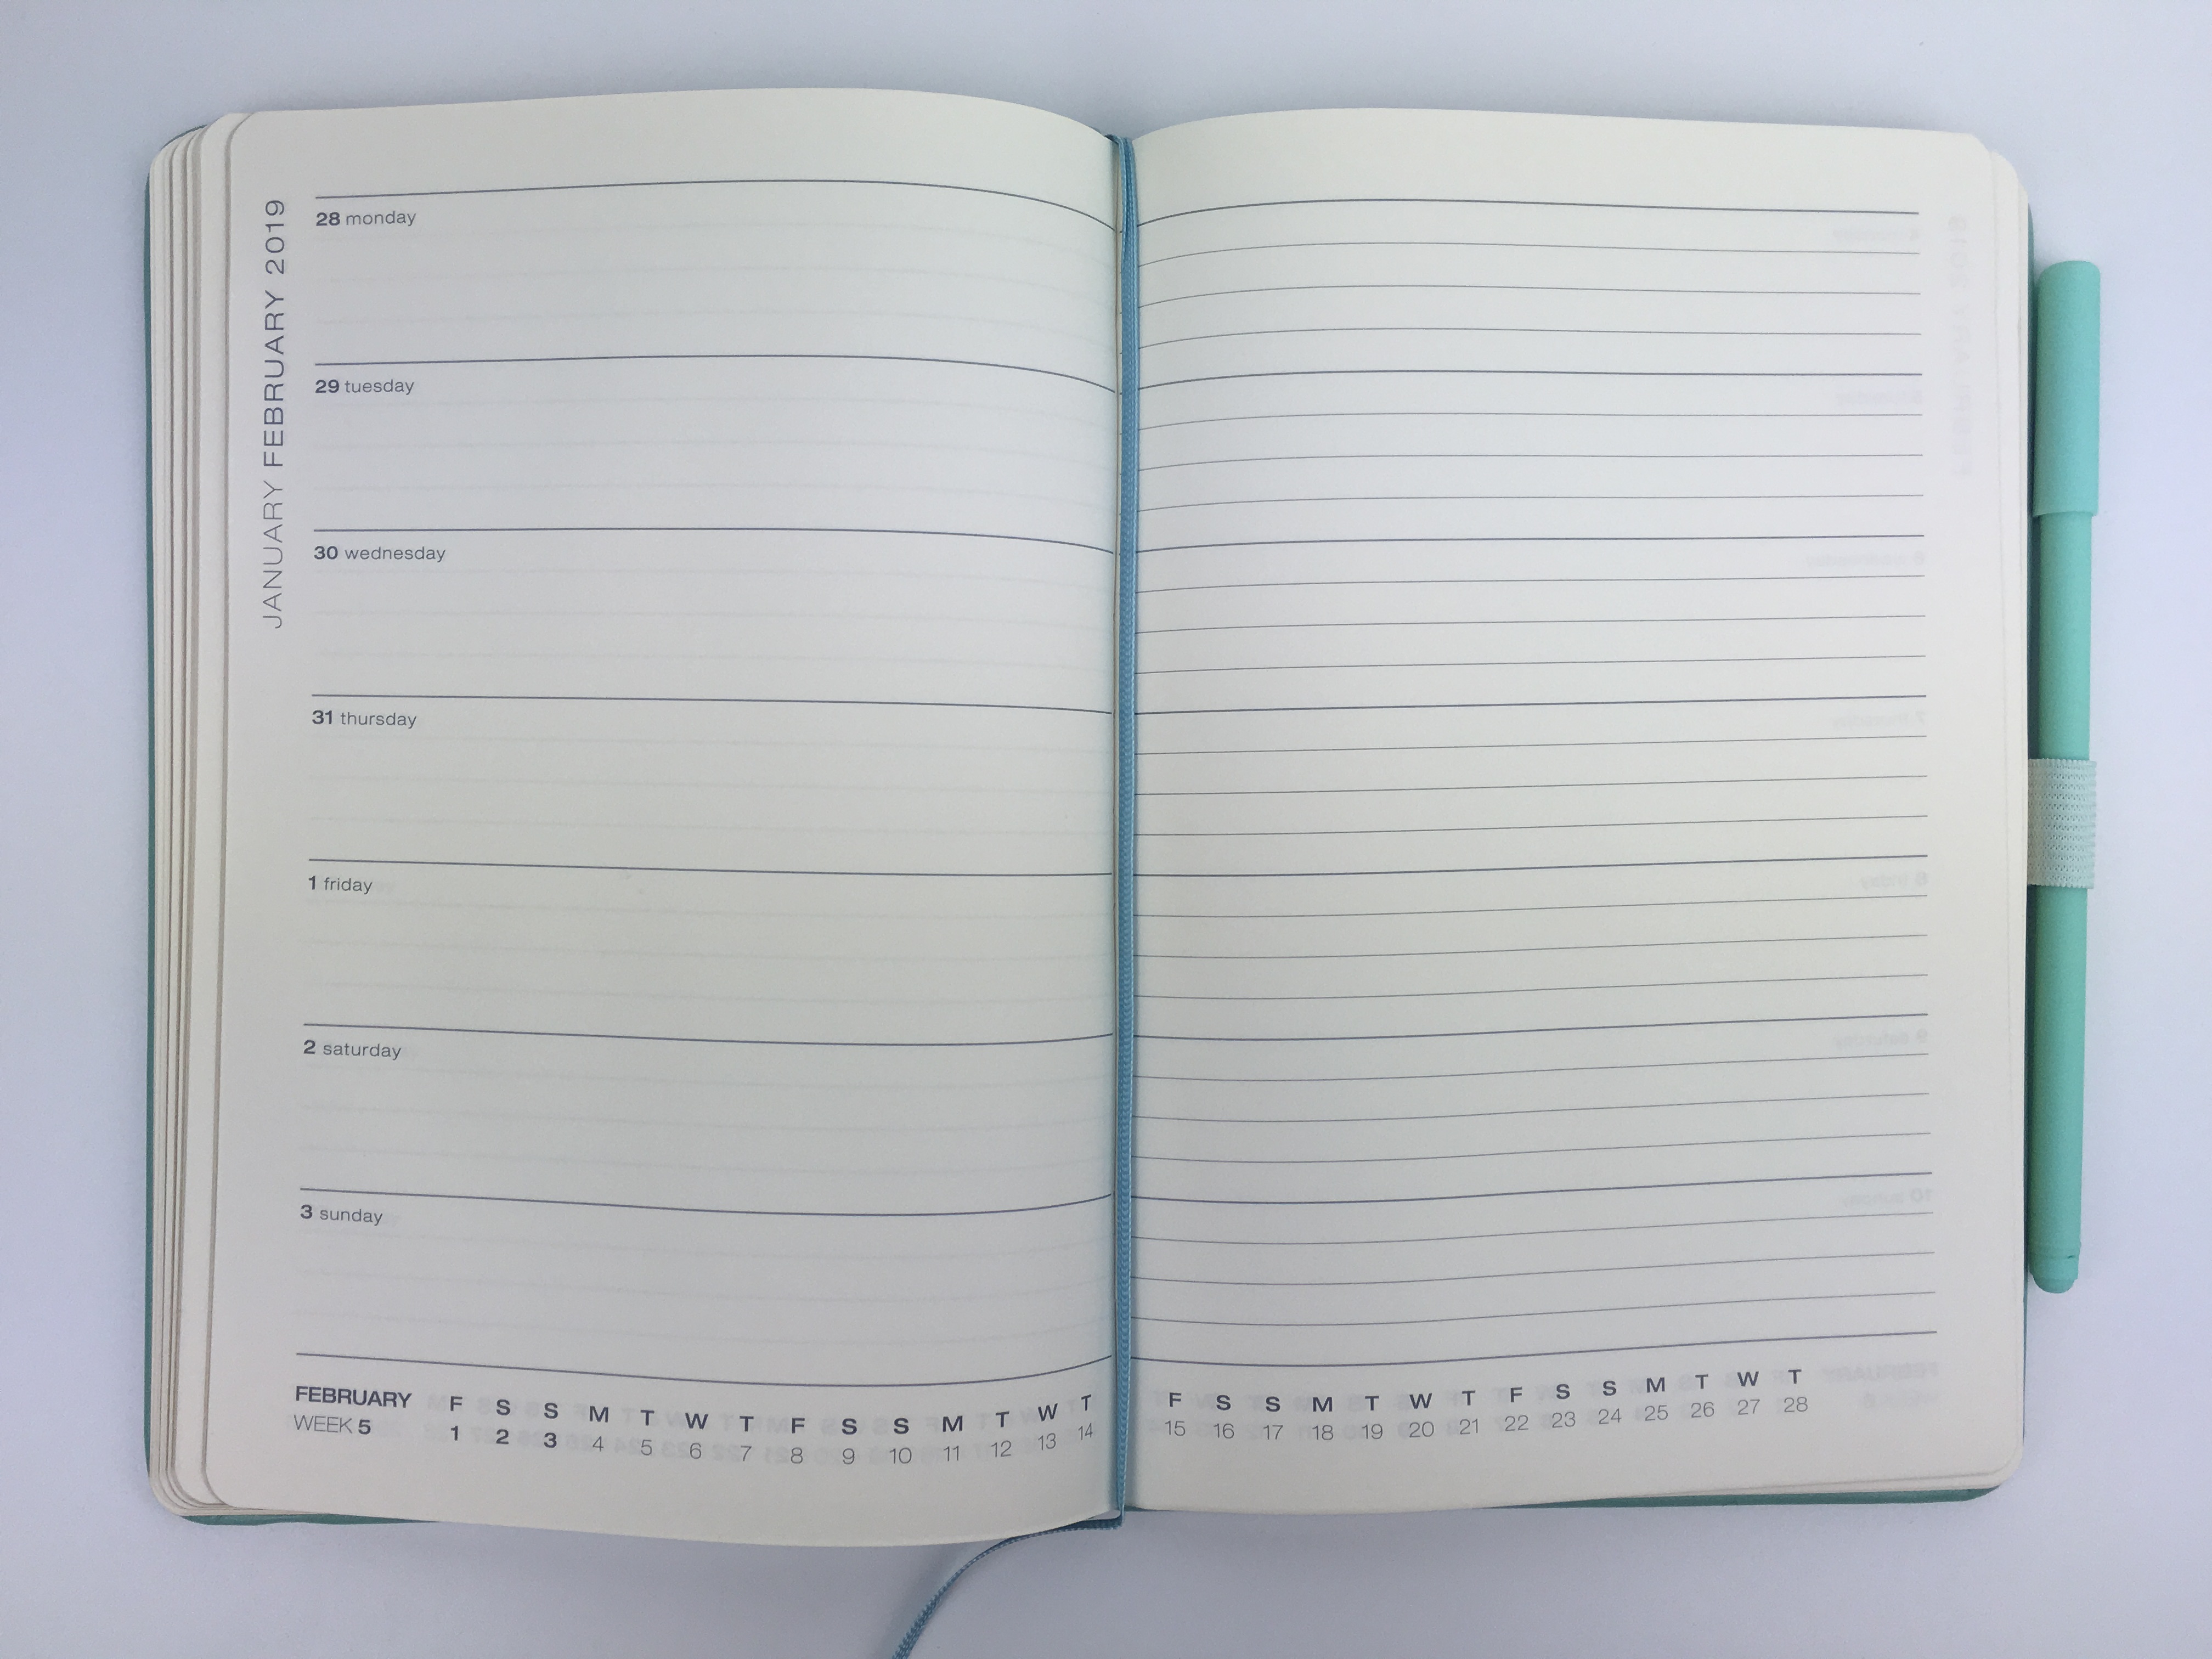 paperchase weekly planner monday start week horizontal with notes simple minimalist gold foil bullet journal alternative affordable united kingdom pros and cons